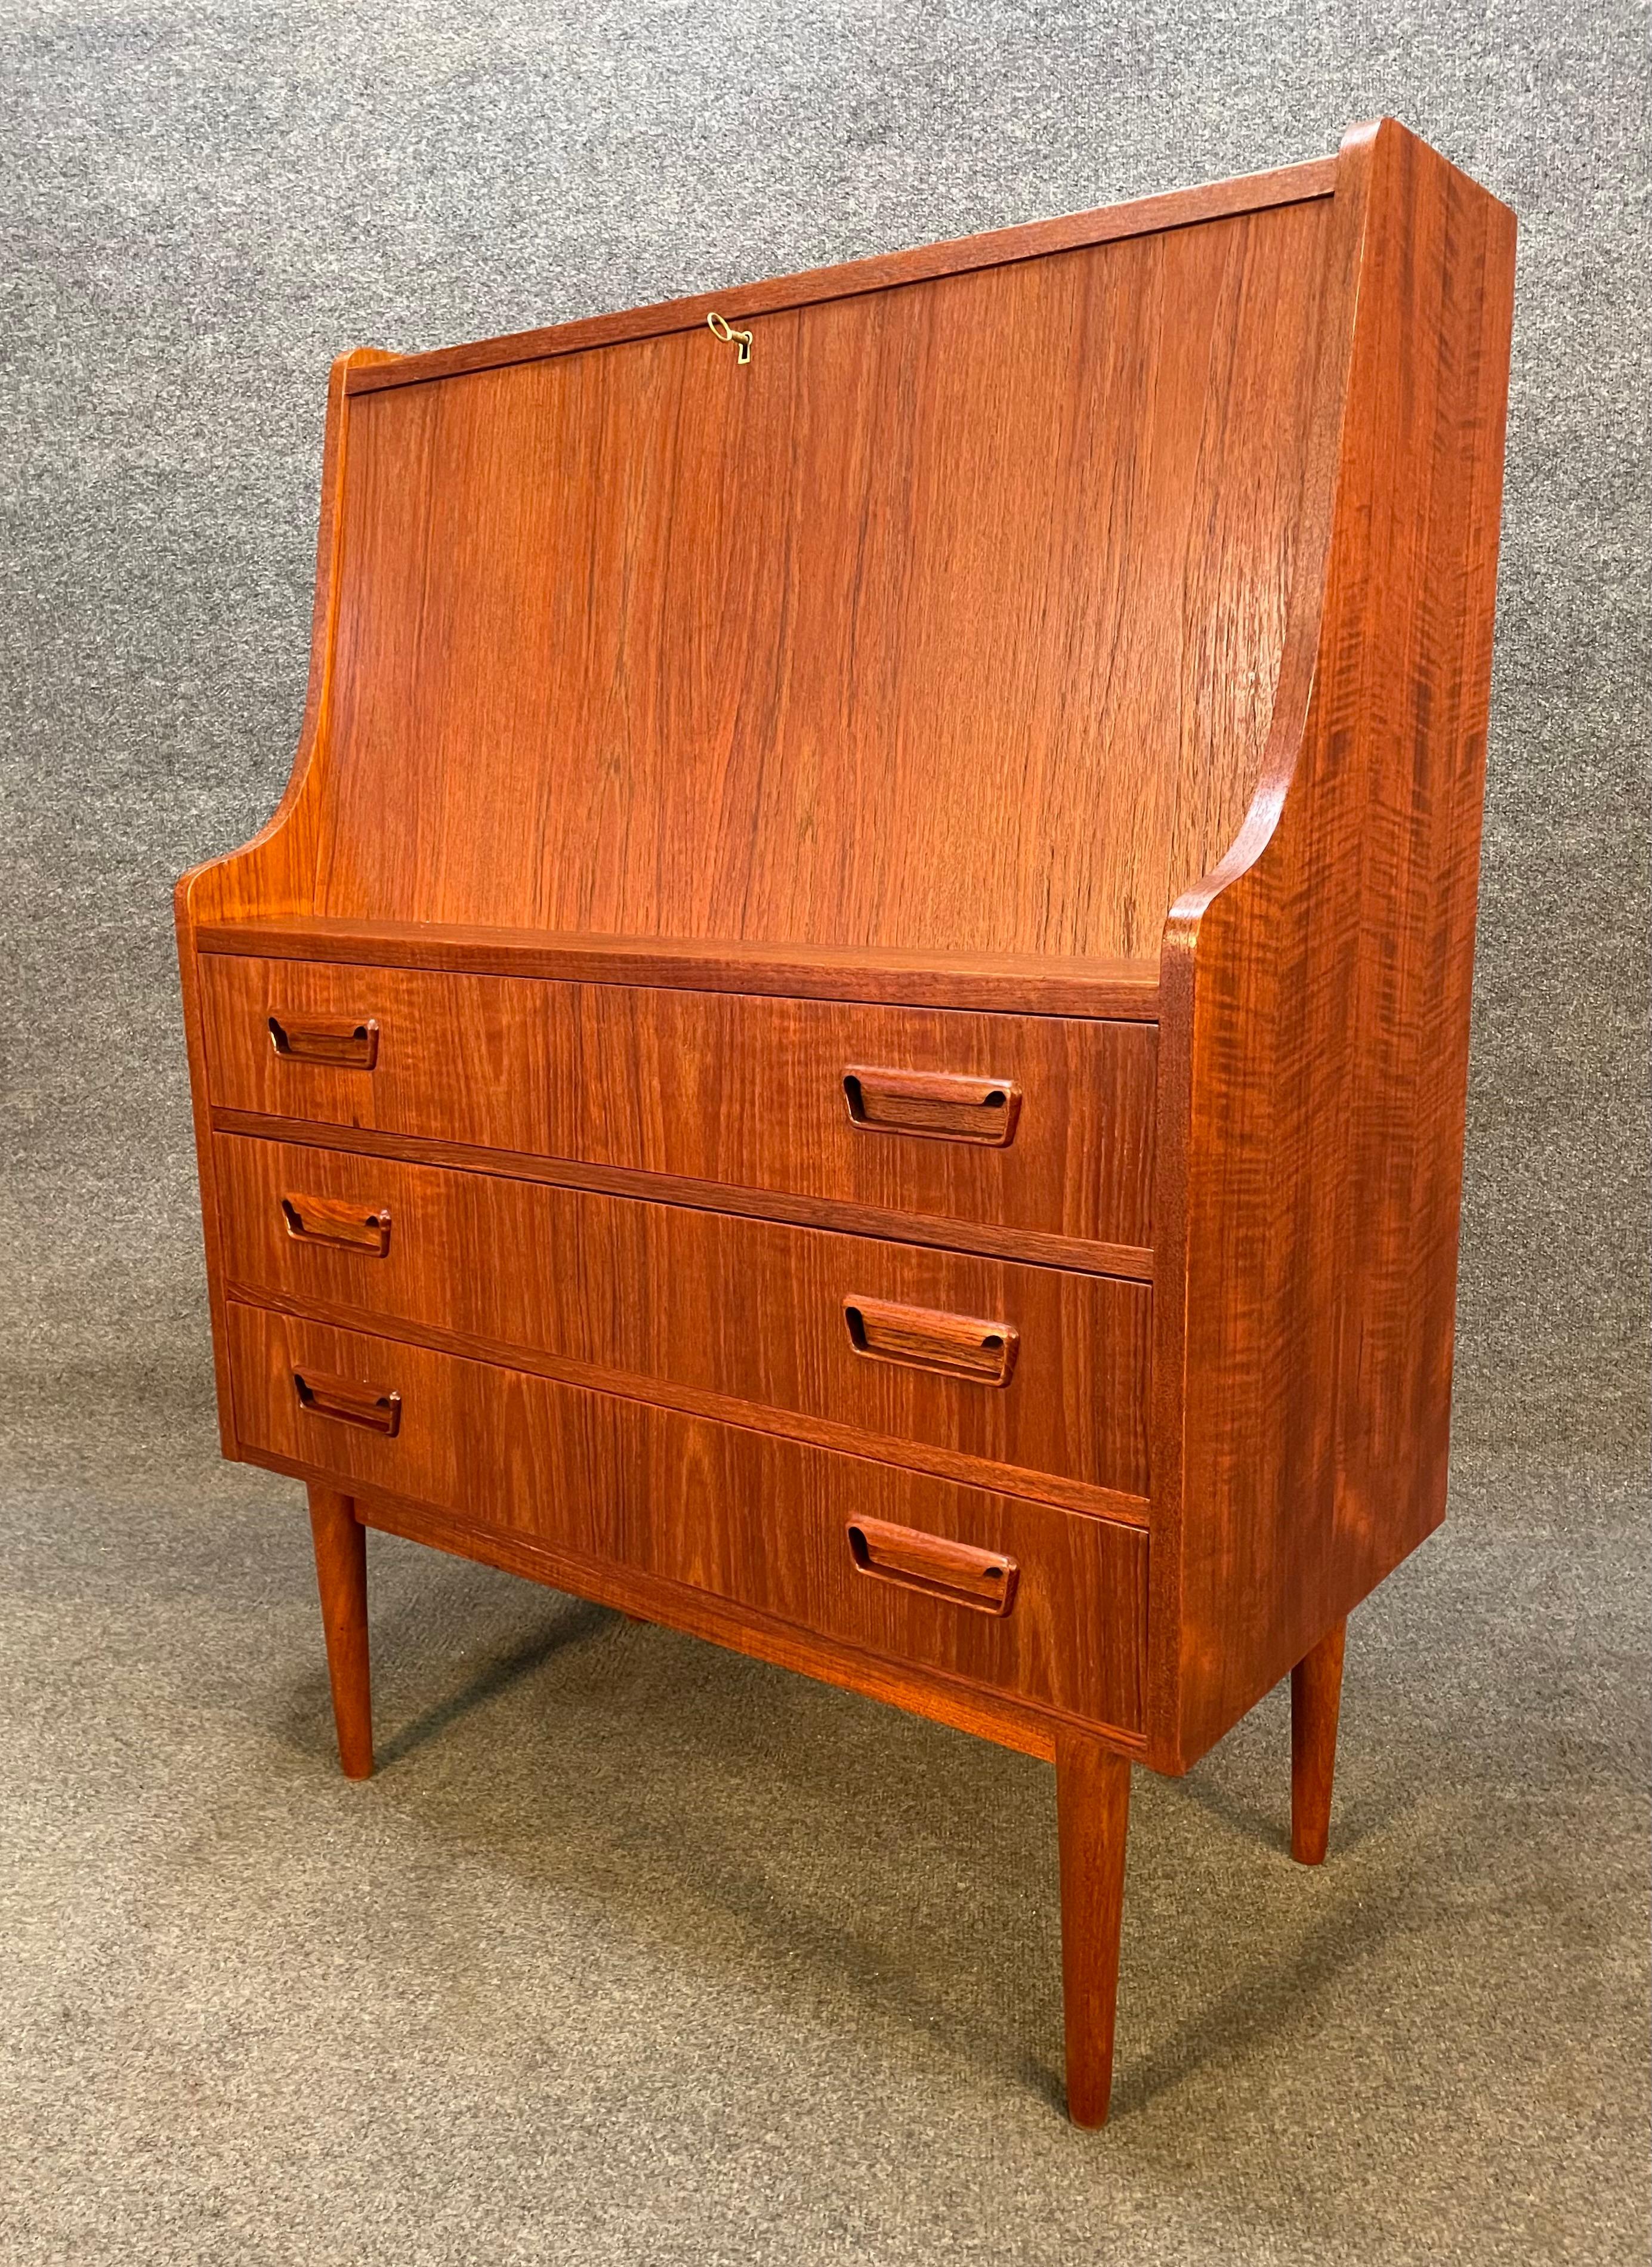 Here is a beautiful Scandinavian modern secretary desk in teak wood manufactured by Gunaar Tibergaard in Denmark in tiger 1960's.
This lovely piece, recently imported from Europe to California before its refinishing, features a vibrant wood grain,